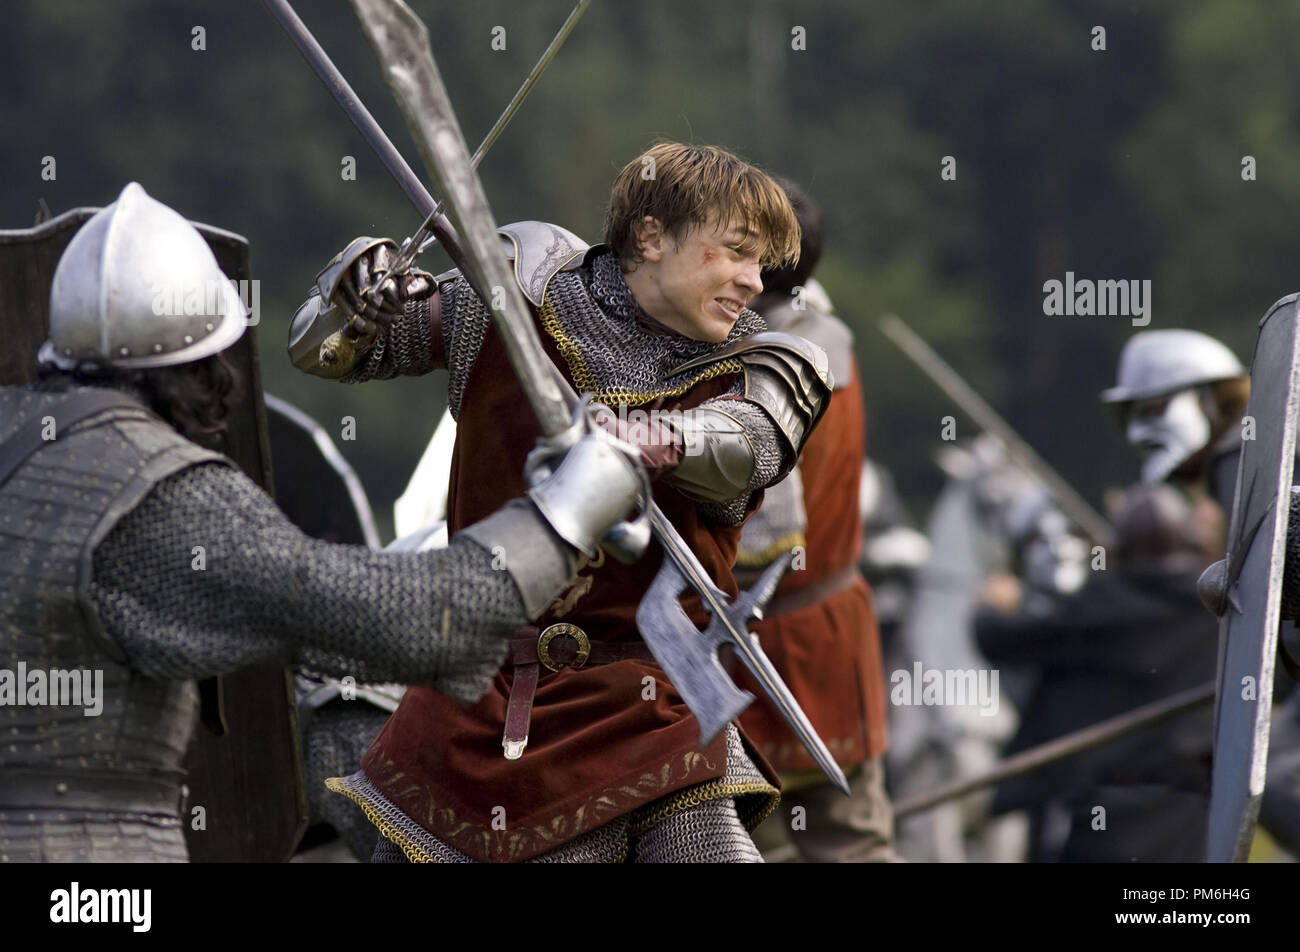 Film Still from 'The Chronicles of Narnia: Prince Caspian' William Moseley © 2008 Walt Disney Pictures Photo credit: Murray Close  File Reference # 30755934THA  For Editorial Use Only -  All Rights Reserved Stock Photo